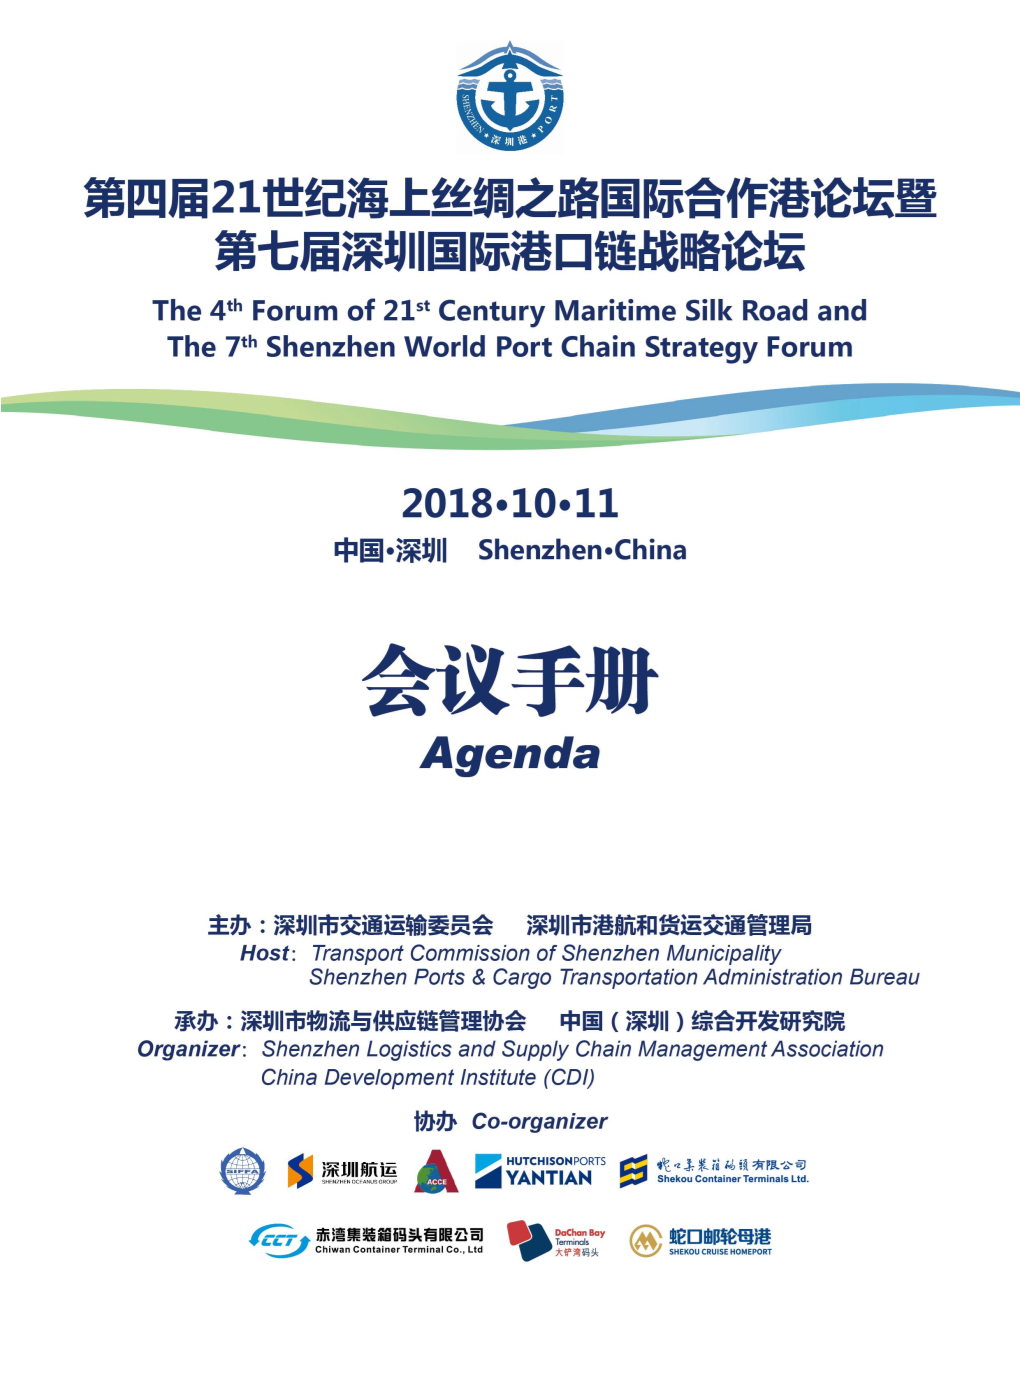 The 4Th Forum of 21St Century Maritime Silk Road and the 7Th Shenzhen World Port Chain Strategy Forum